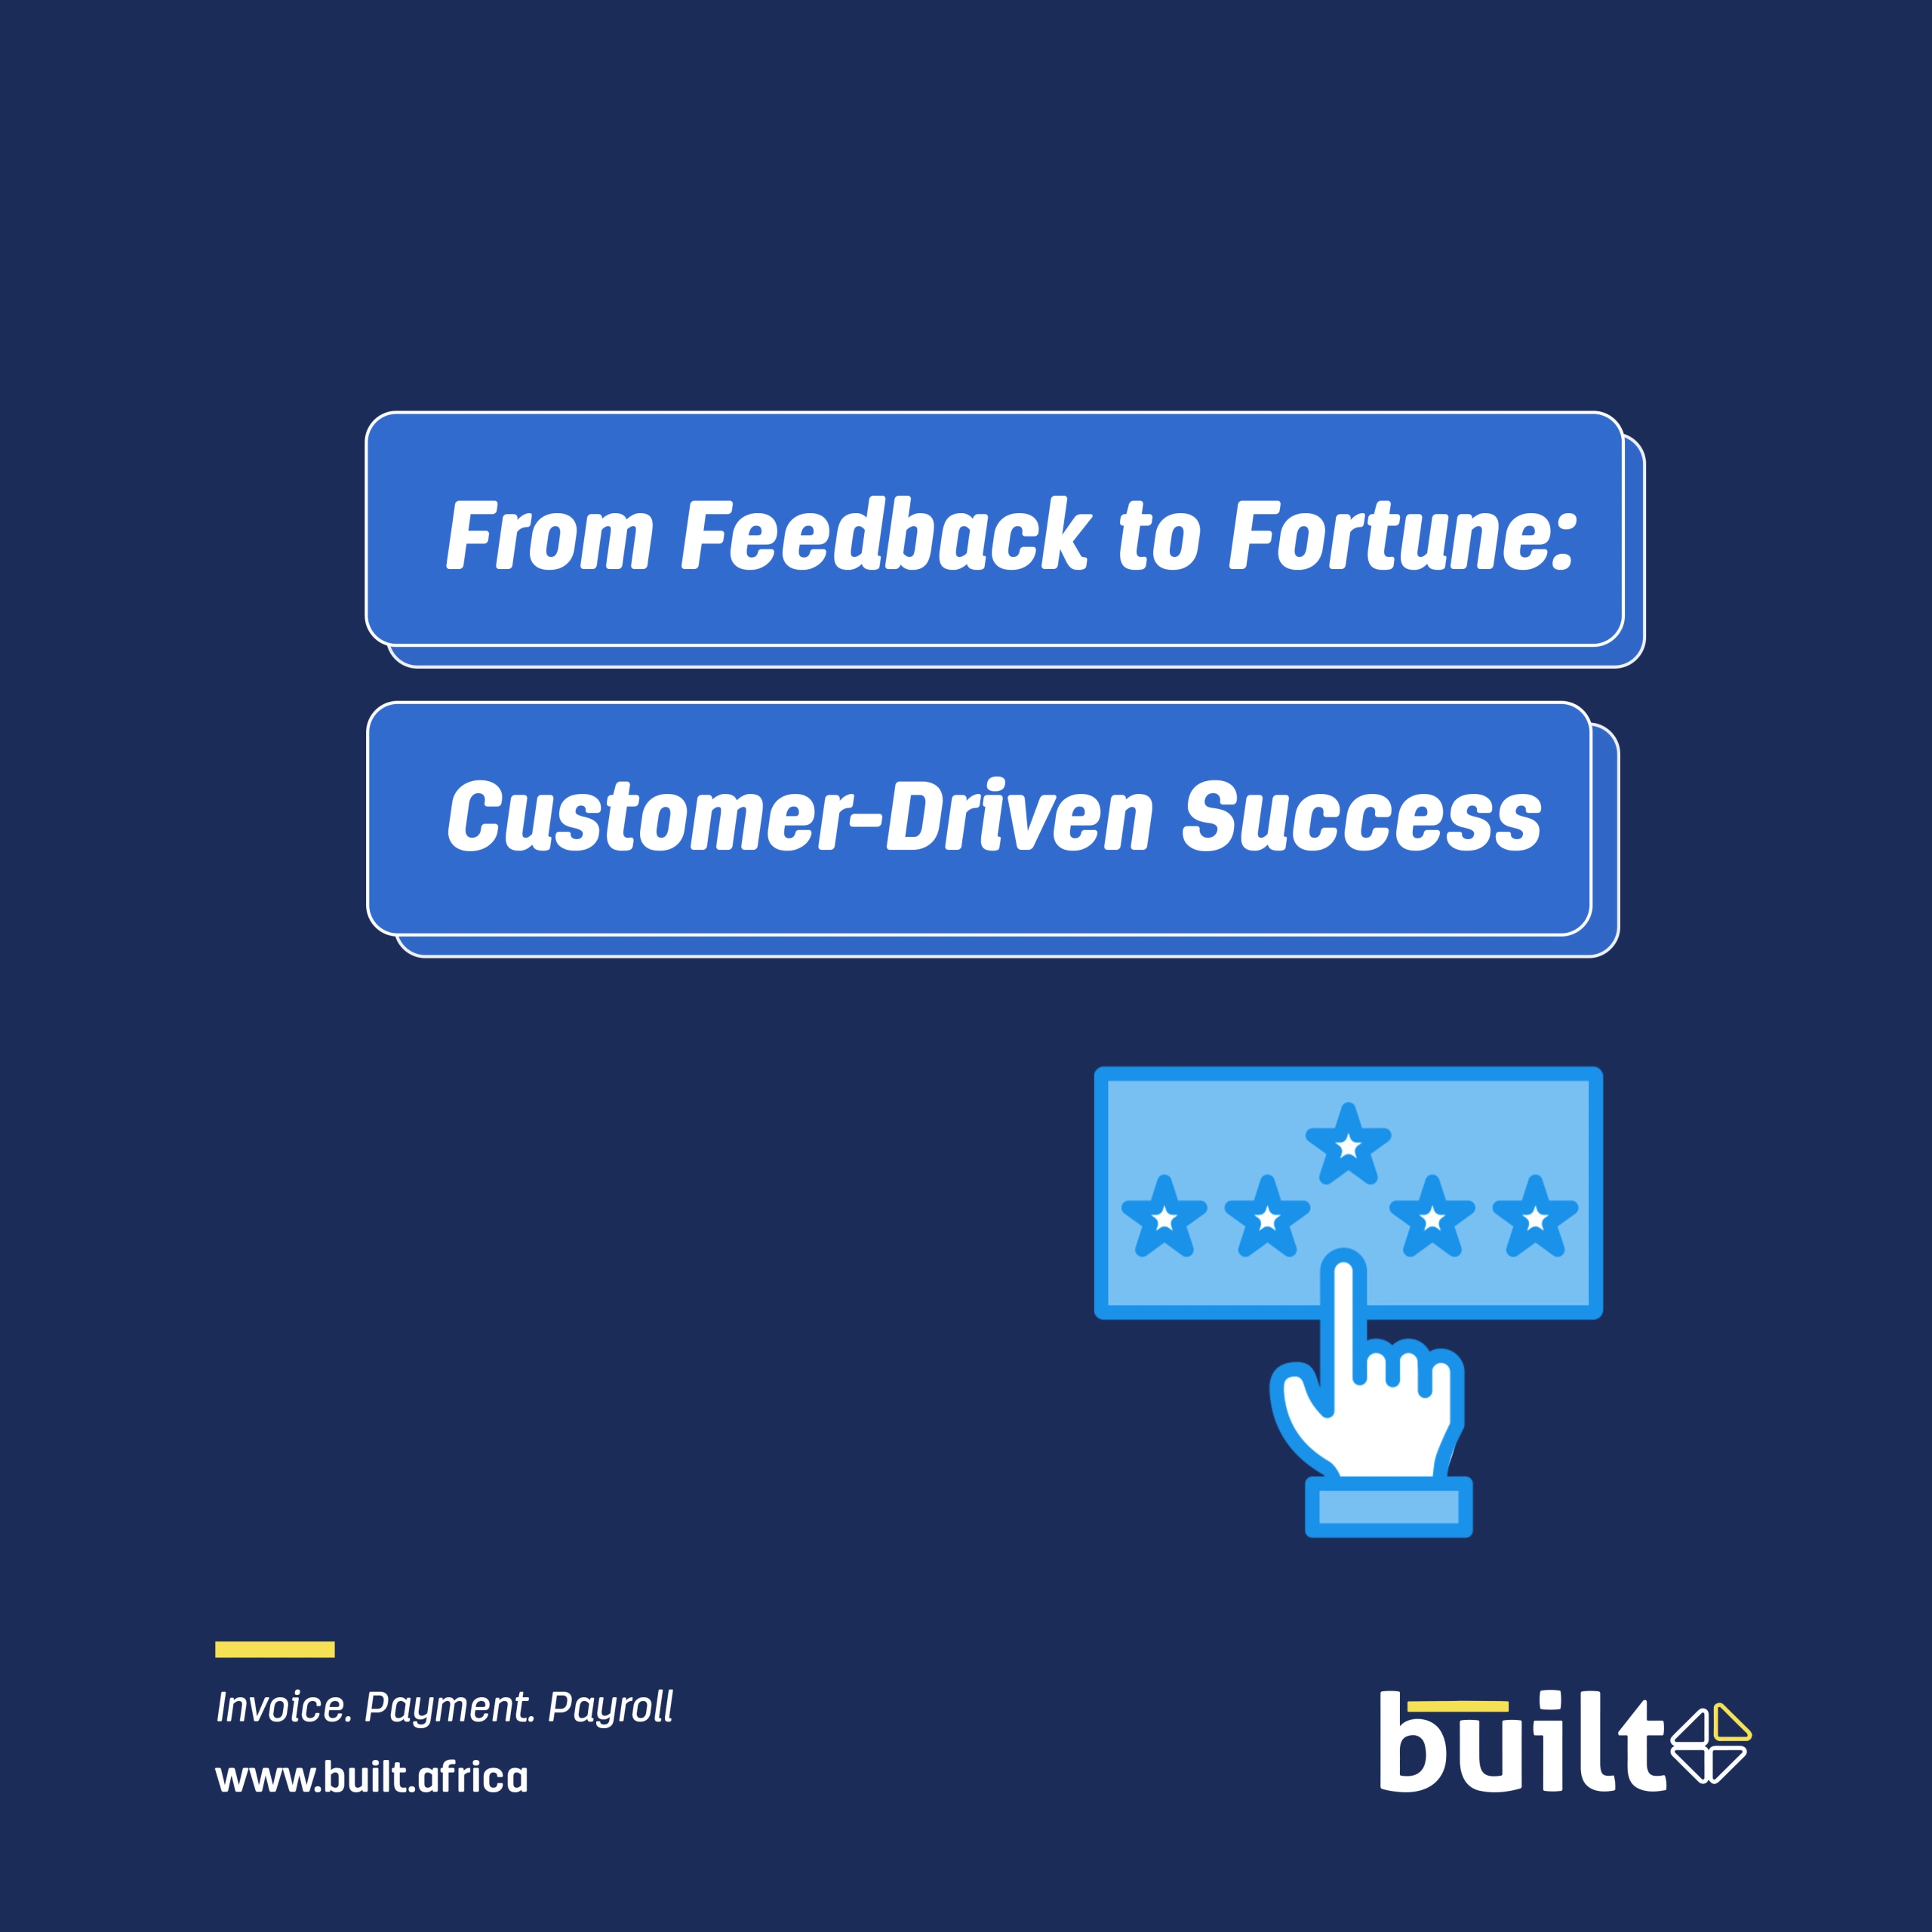 From Feedback to Fortune: Customer-Driven Success